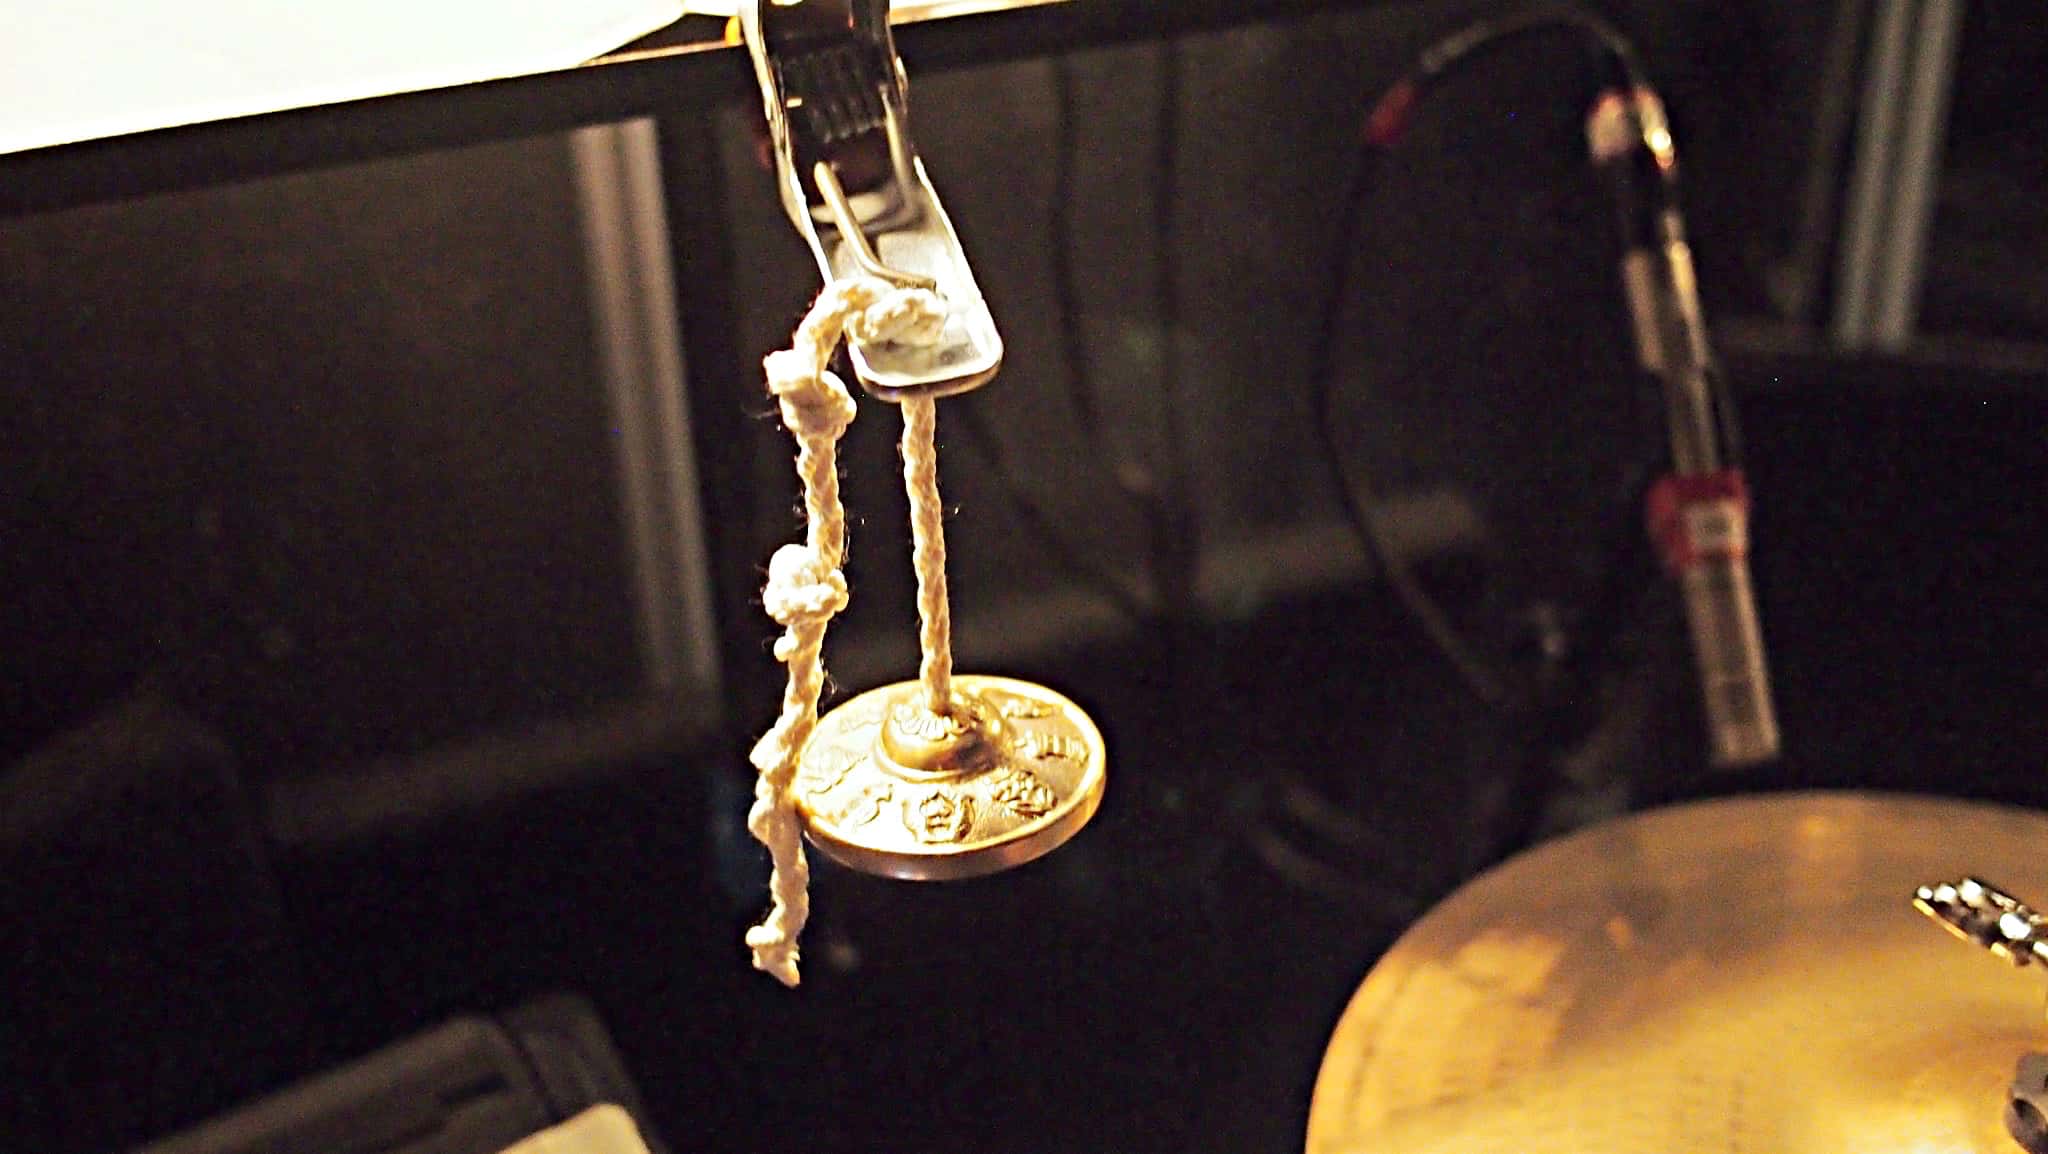 Greg Germann’s combined book setup for the National tour of the Broadway show Finding Neverland at the Paramount Theatre in Seattle, Washington.